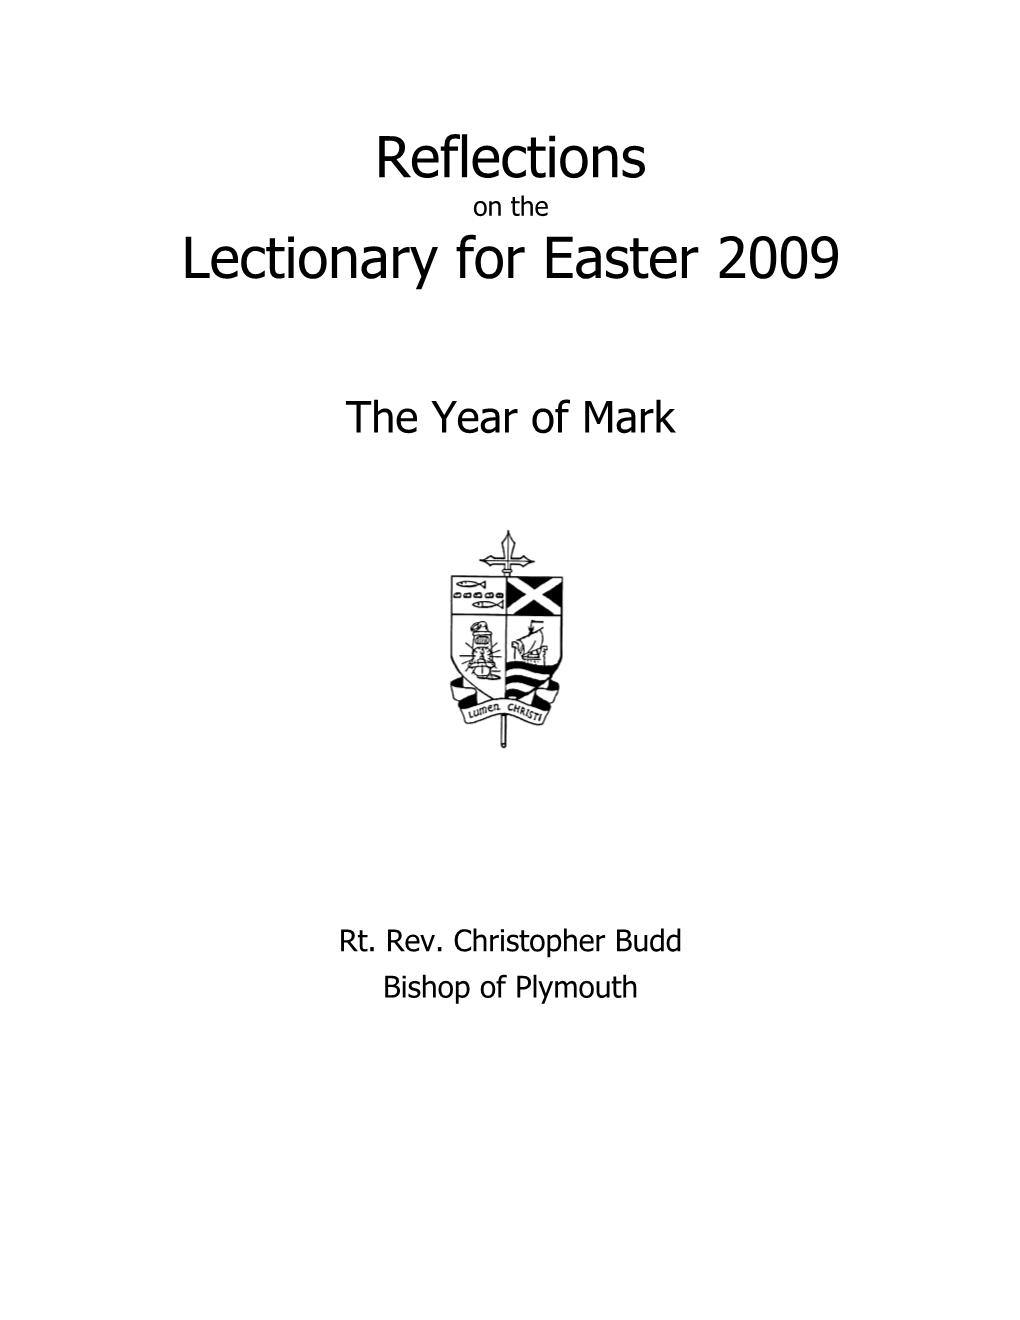 Lectionary for Easter 2009